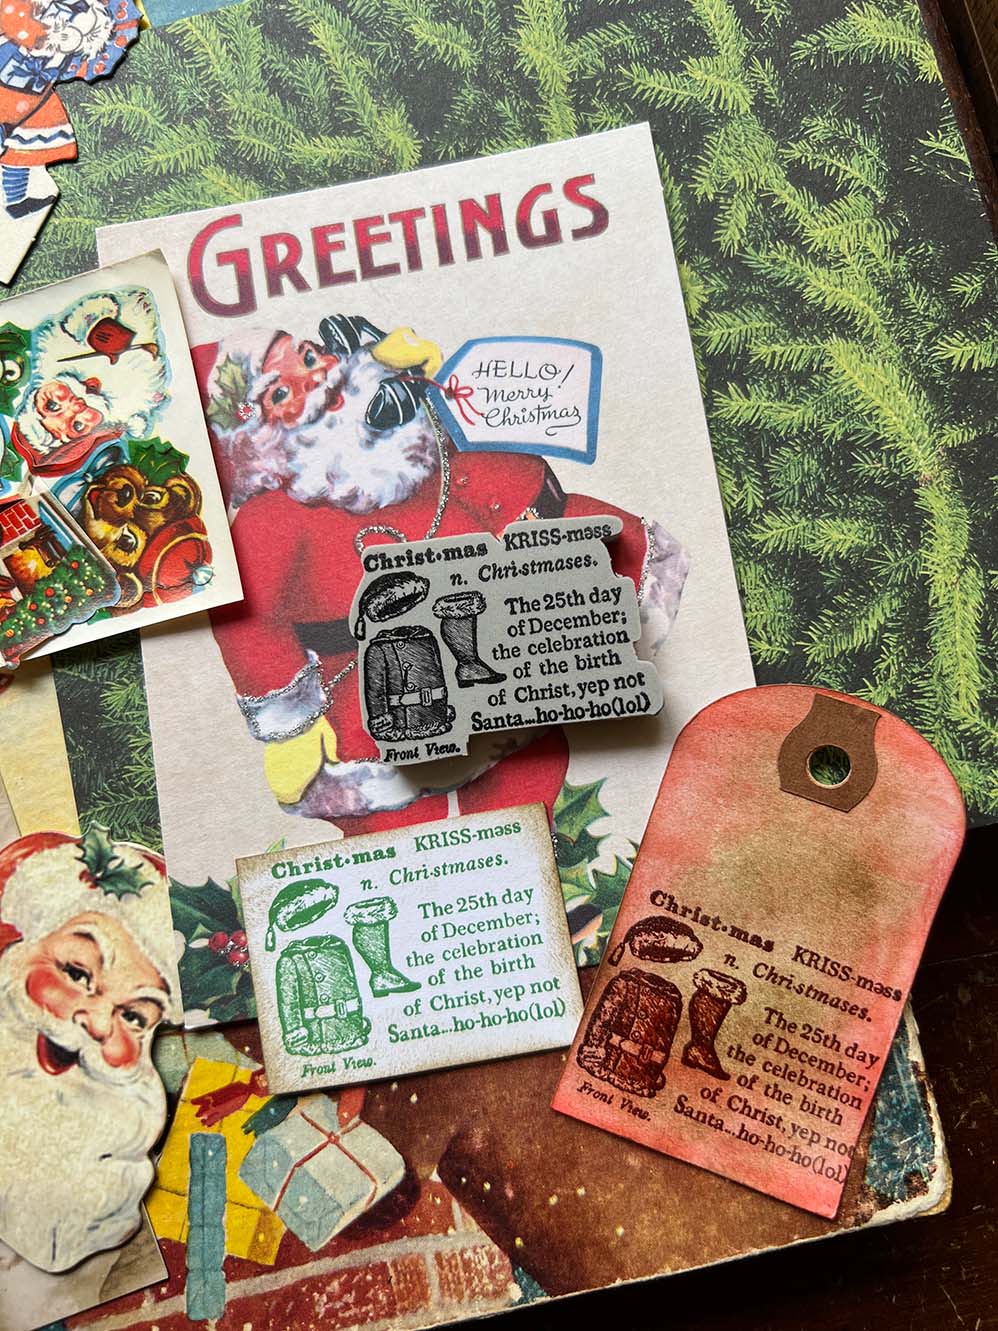 Christmas Ho Ho Ho Rubber Stamp by Mic Moc (クリスマス) from micmoc.com